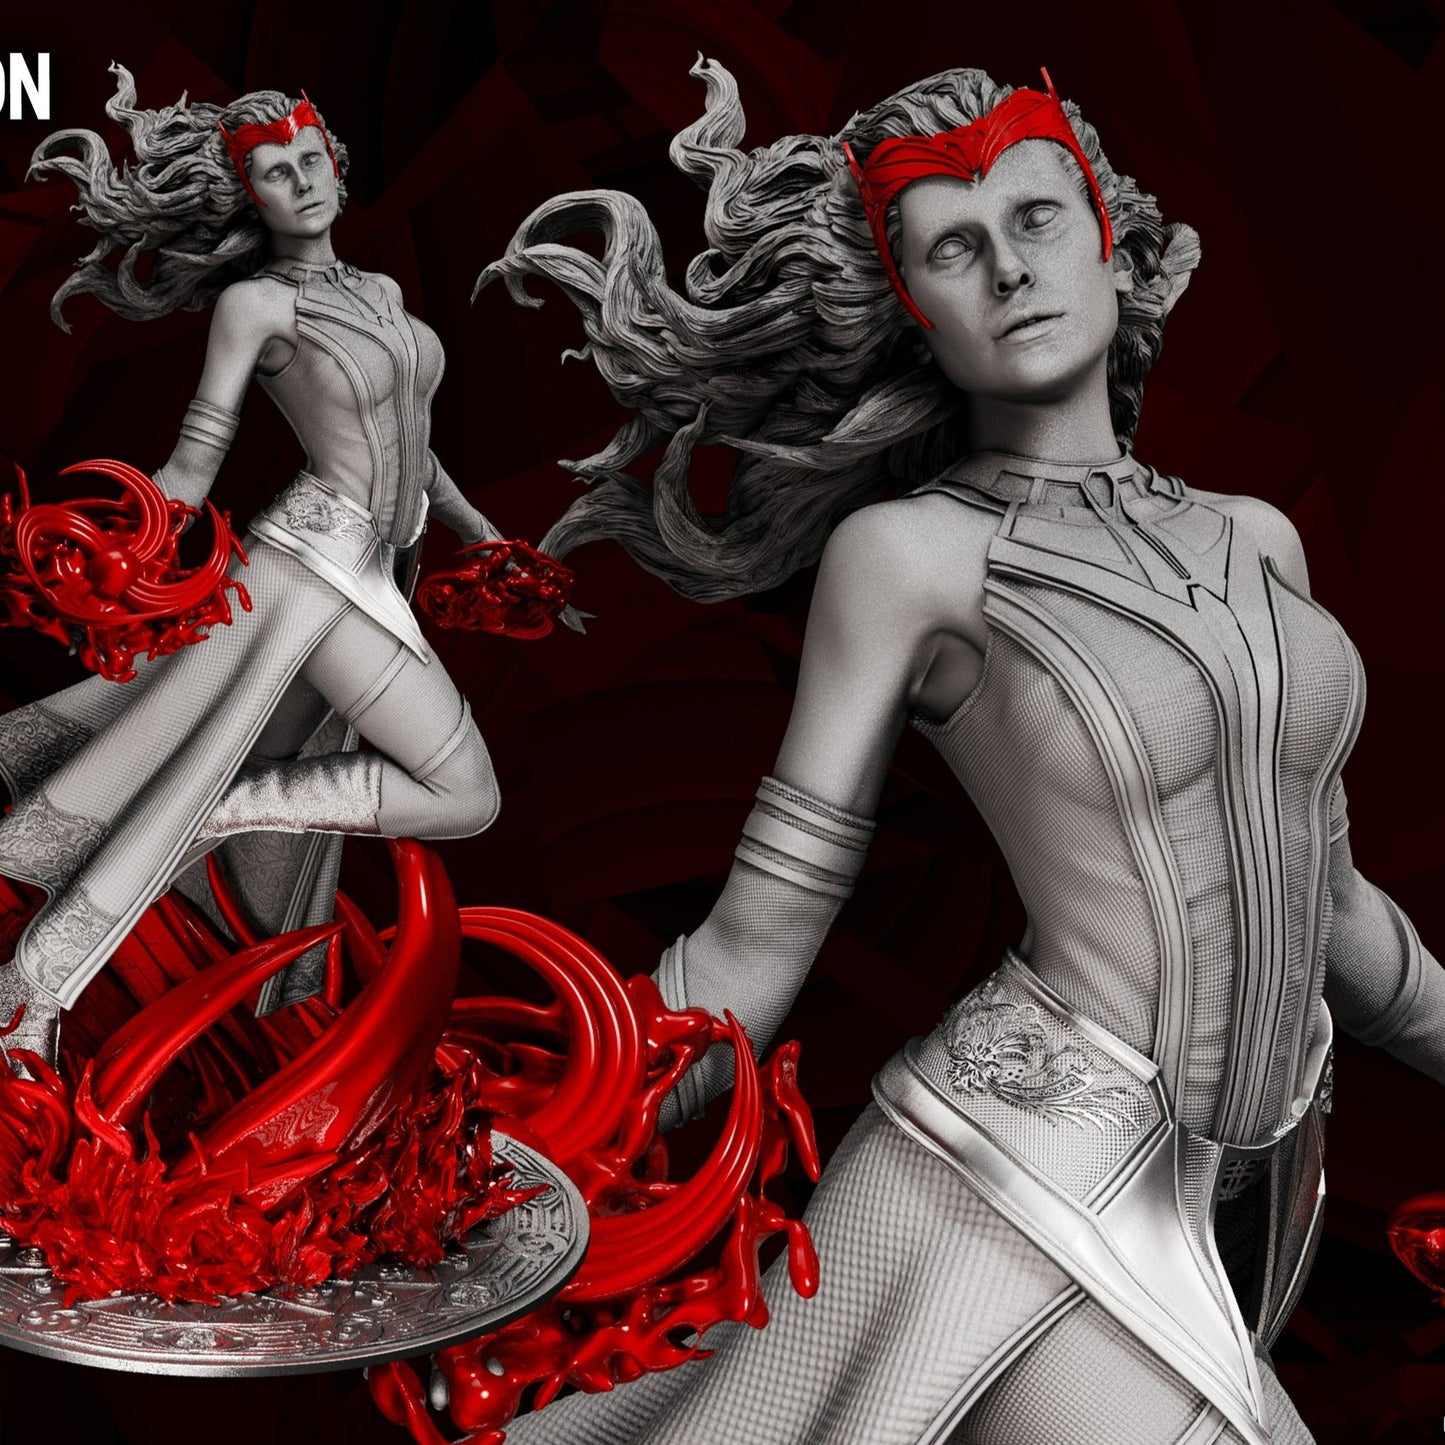 WANDA MAXIMOFF Scarlet Witch 3D Printed Figurine FunArt | Diorama by Wicked UNPAINTED GARAGE KIT